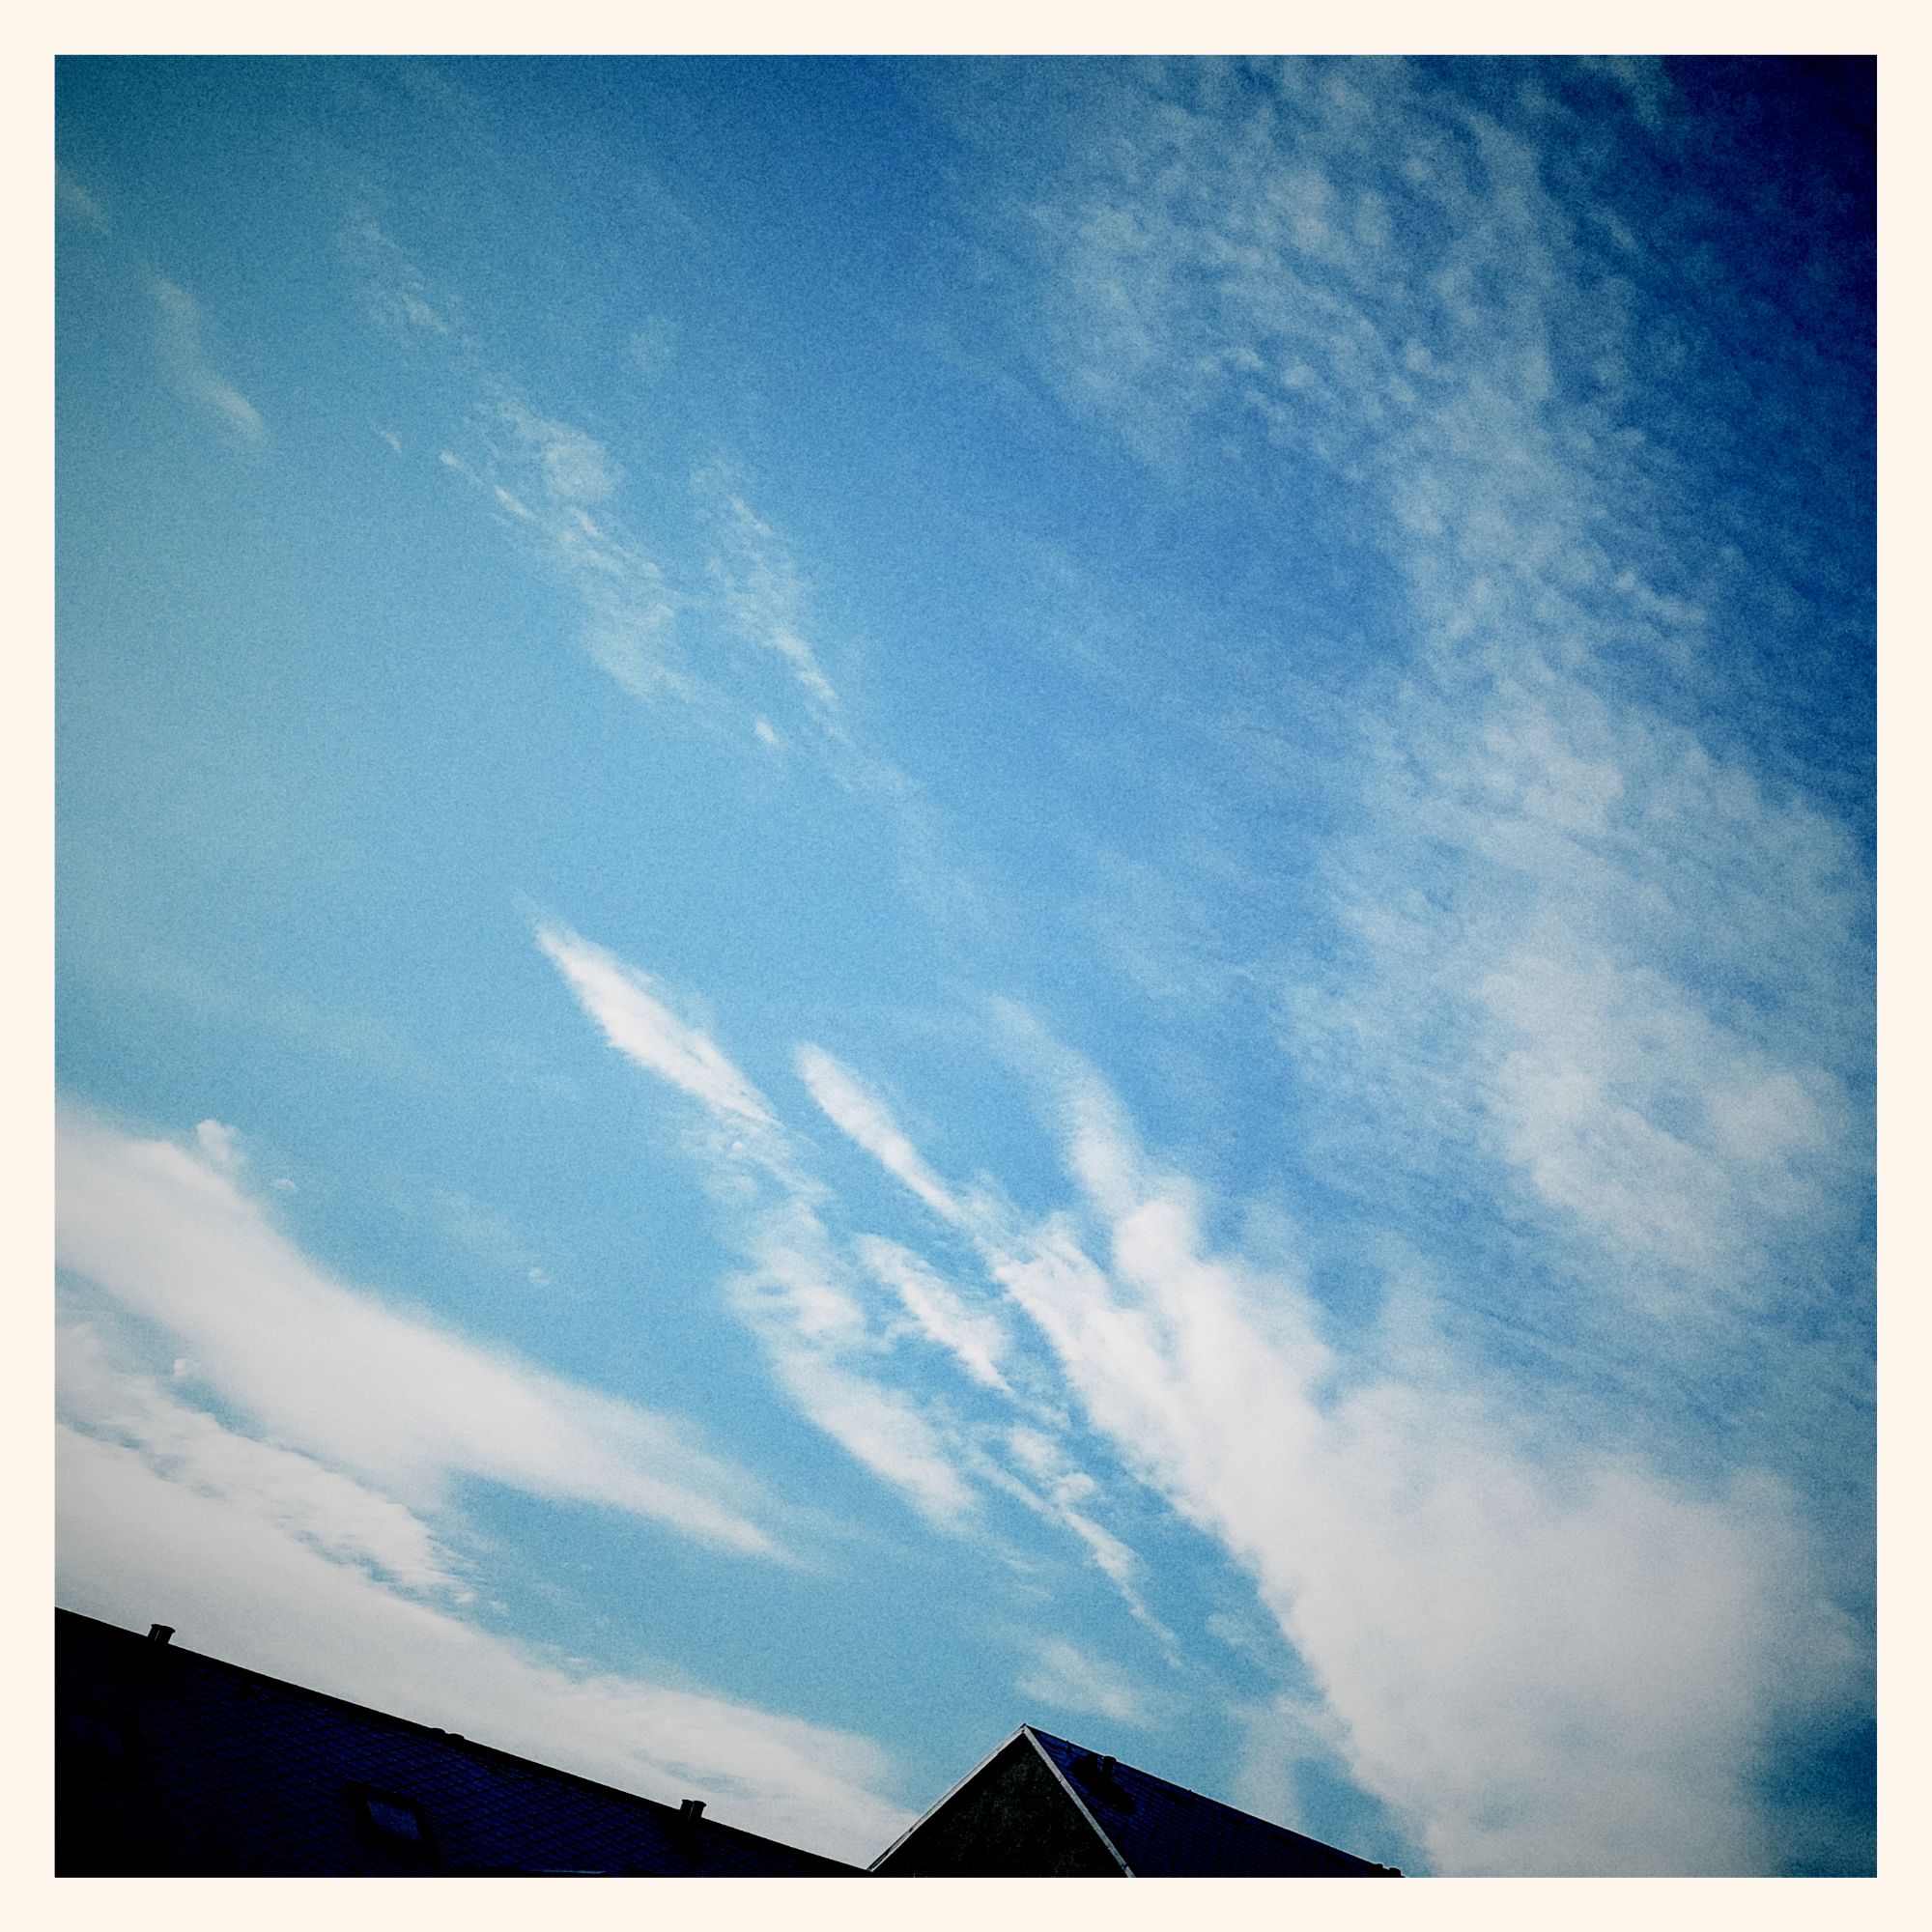 White clouds in a feather-like structure on blue sky. Parts of a roof below.